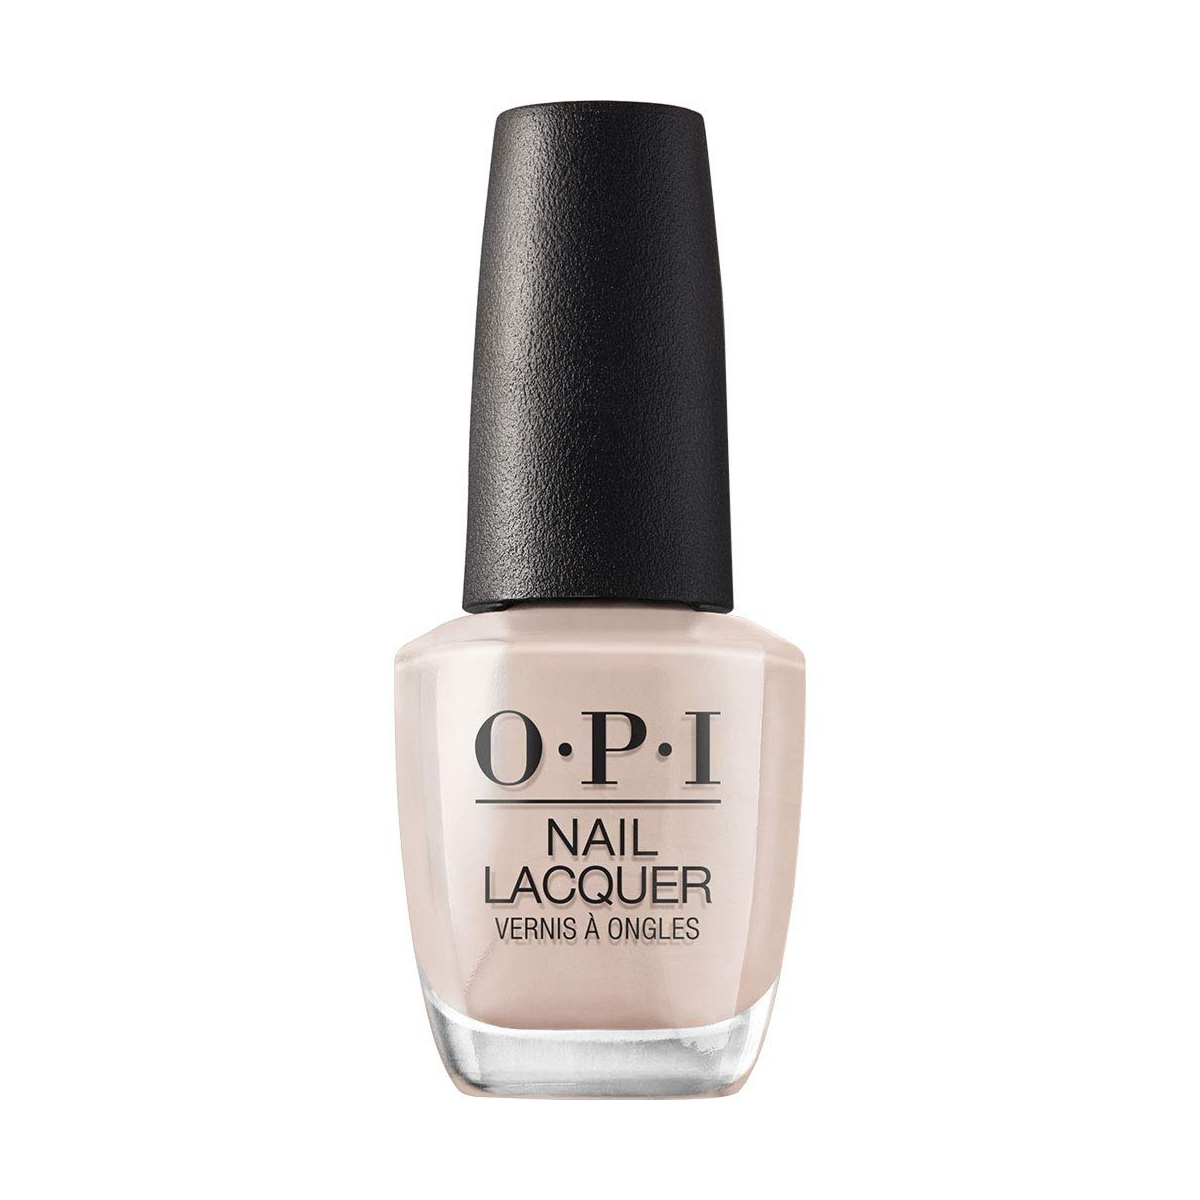 OPI Nail Lacquer in Coconuts Over OPI